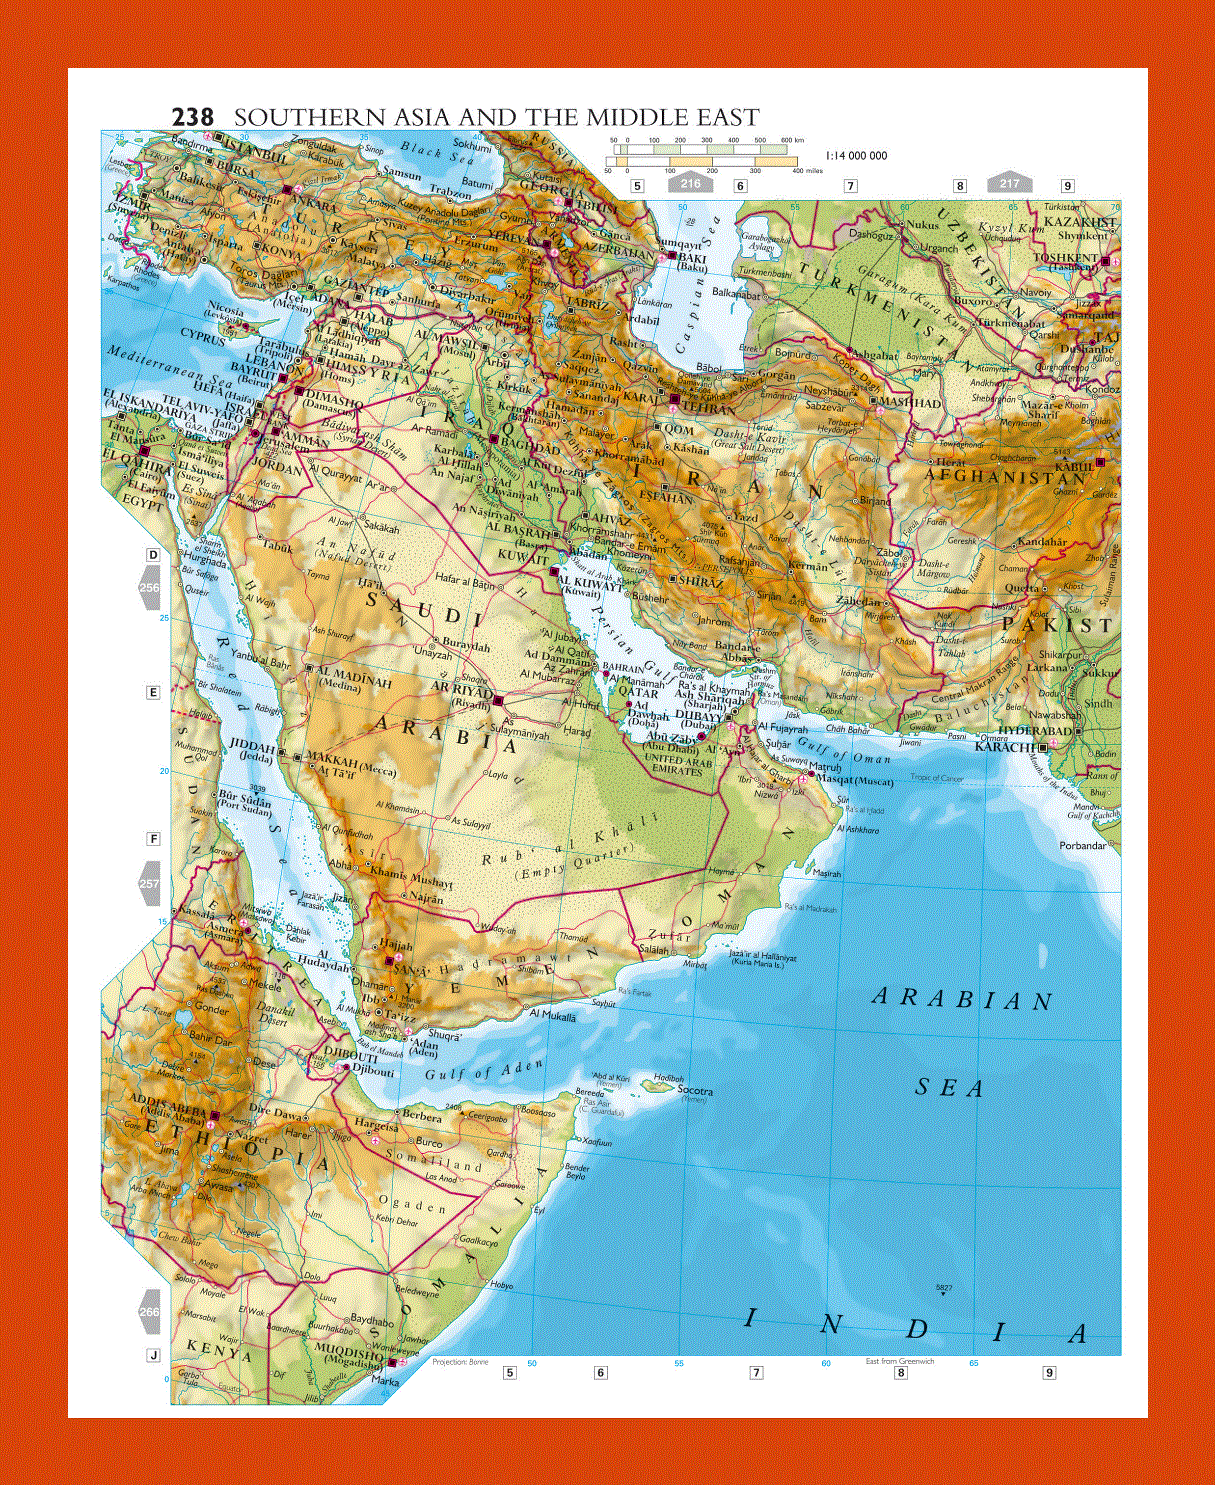 Elevation map of Southern Asia and the Middle East